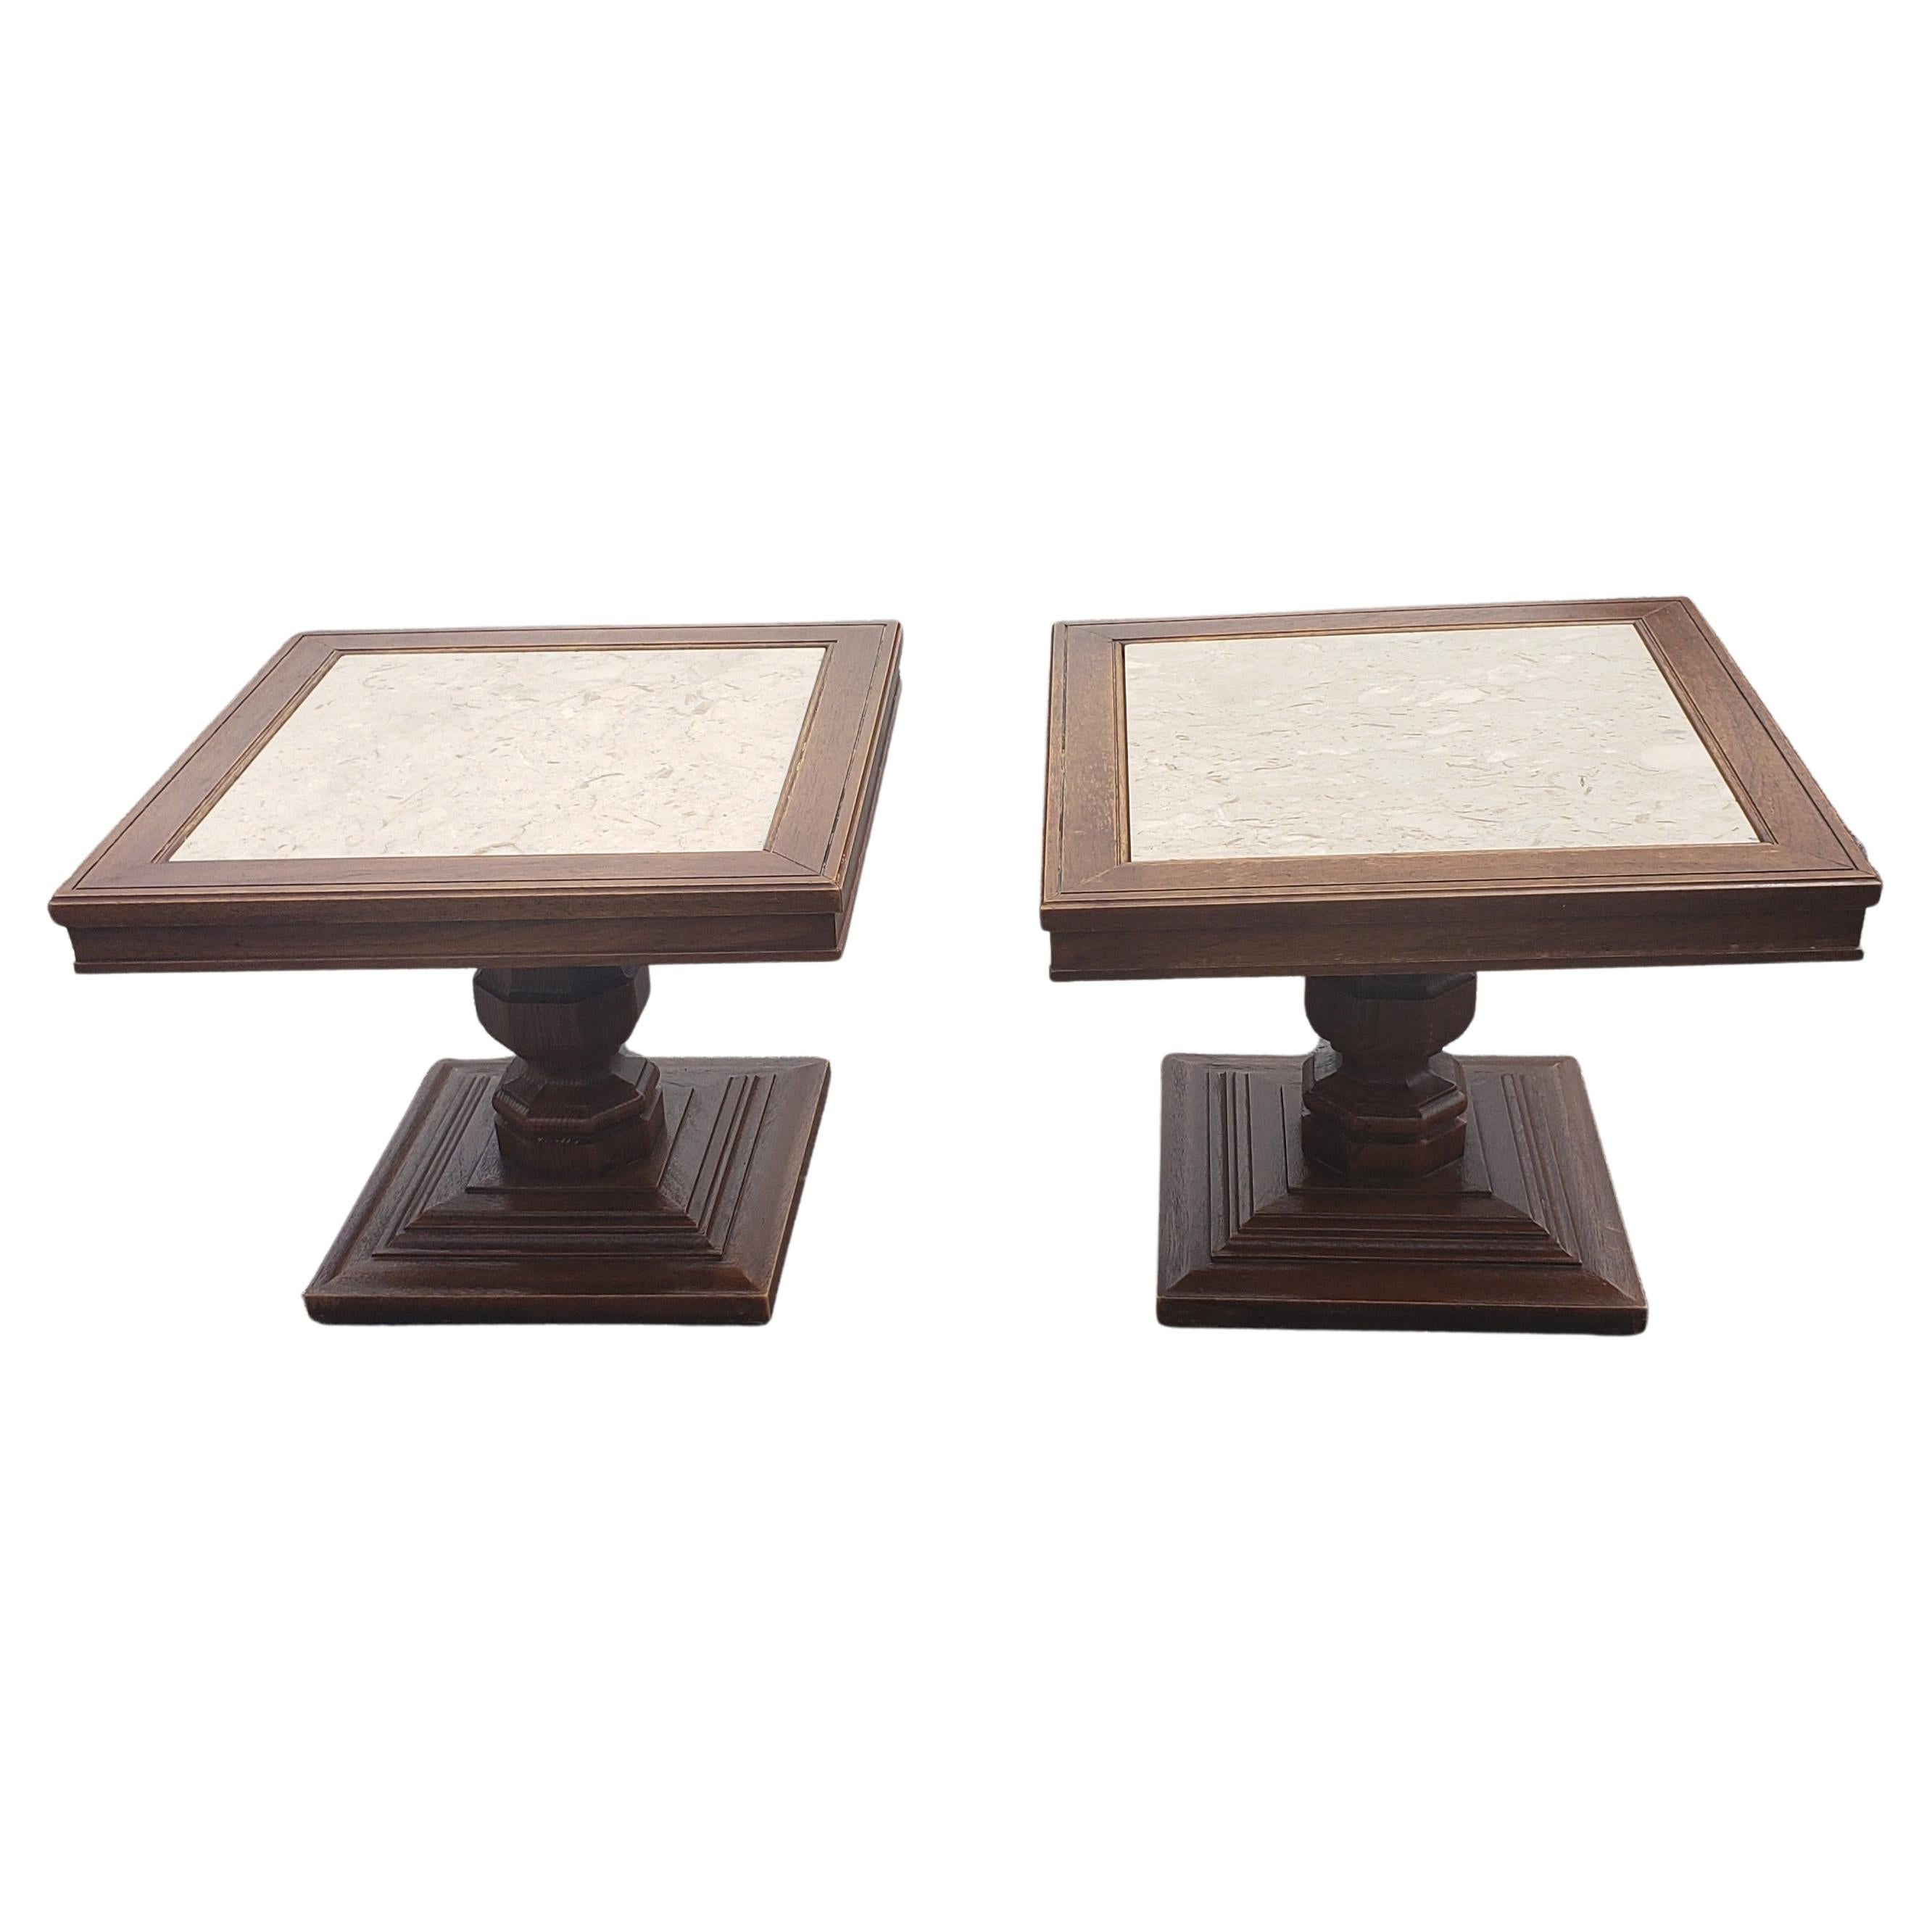 1960s Italian Pedestal Oak Side Tables with Marble Top Inserts, a Pair